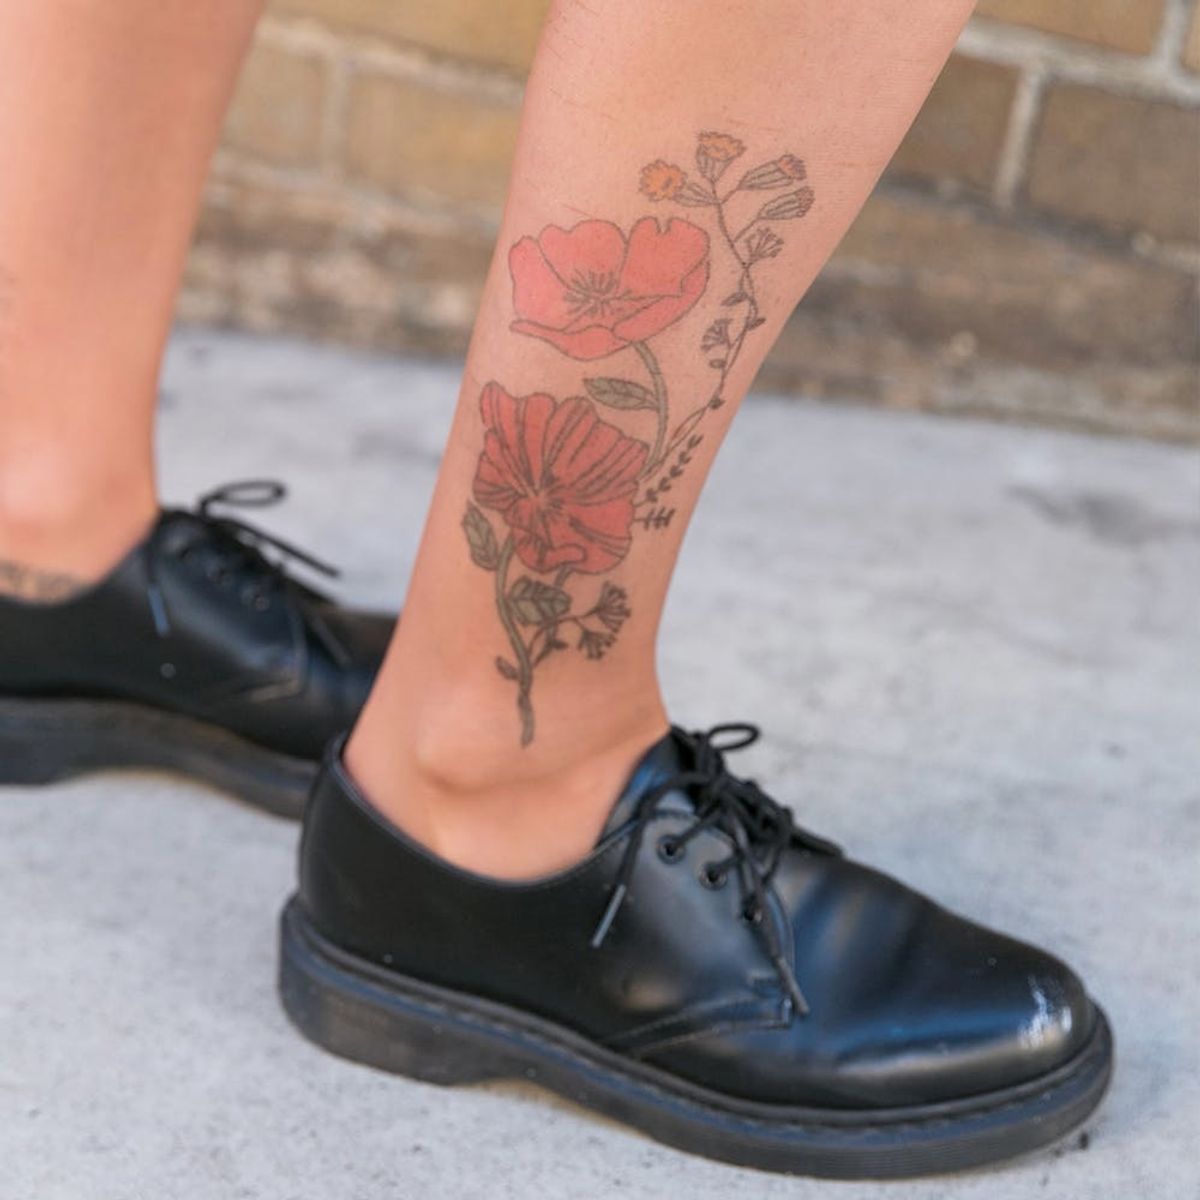 Take Tempory Tattoos to the Next Level With These Tights